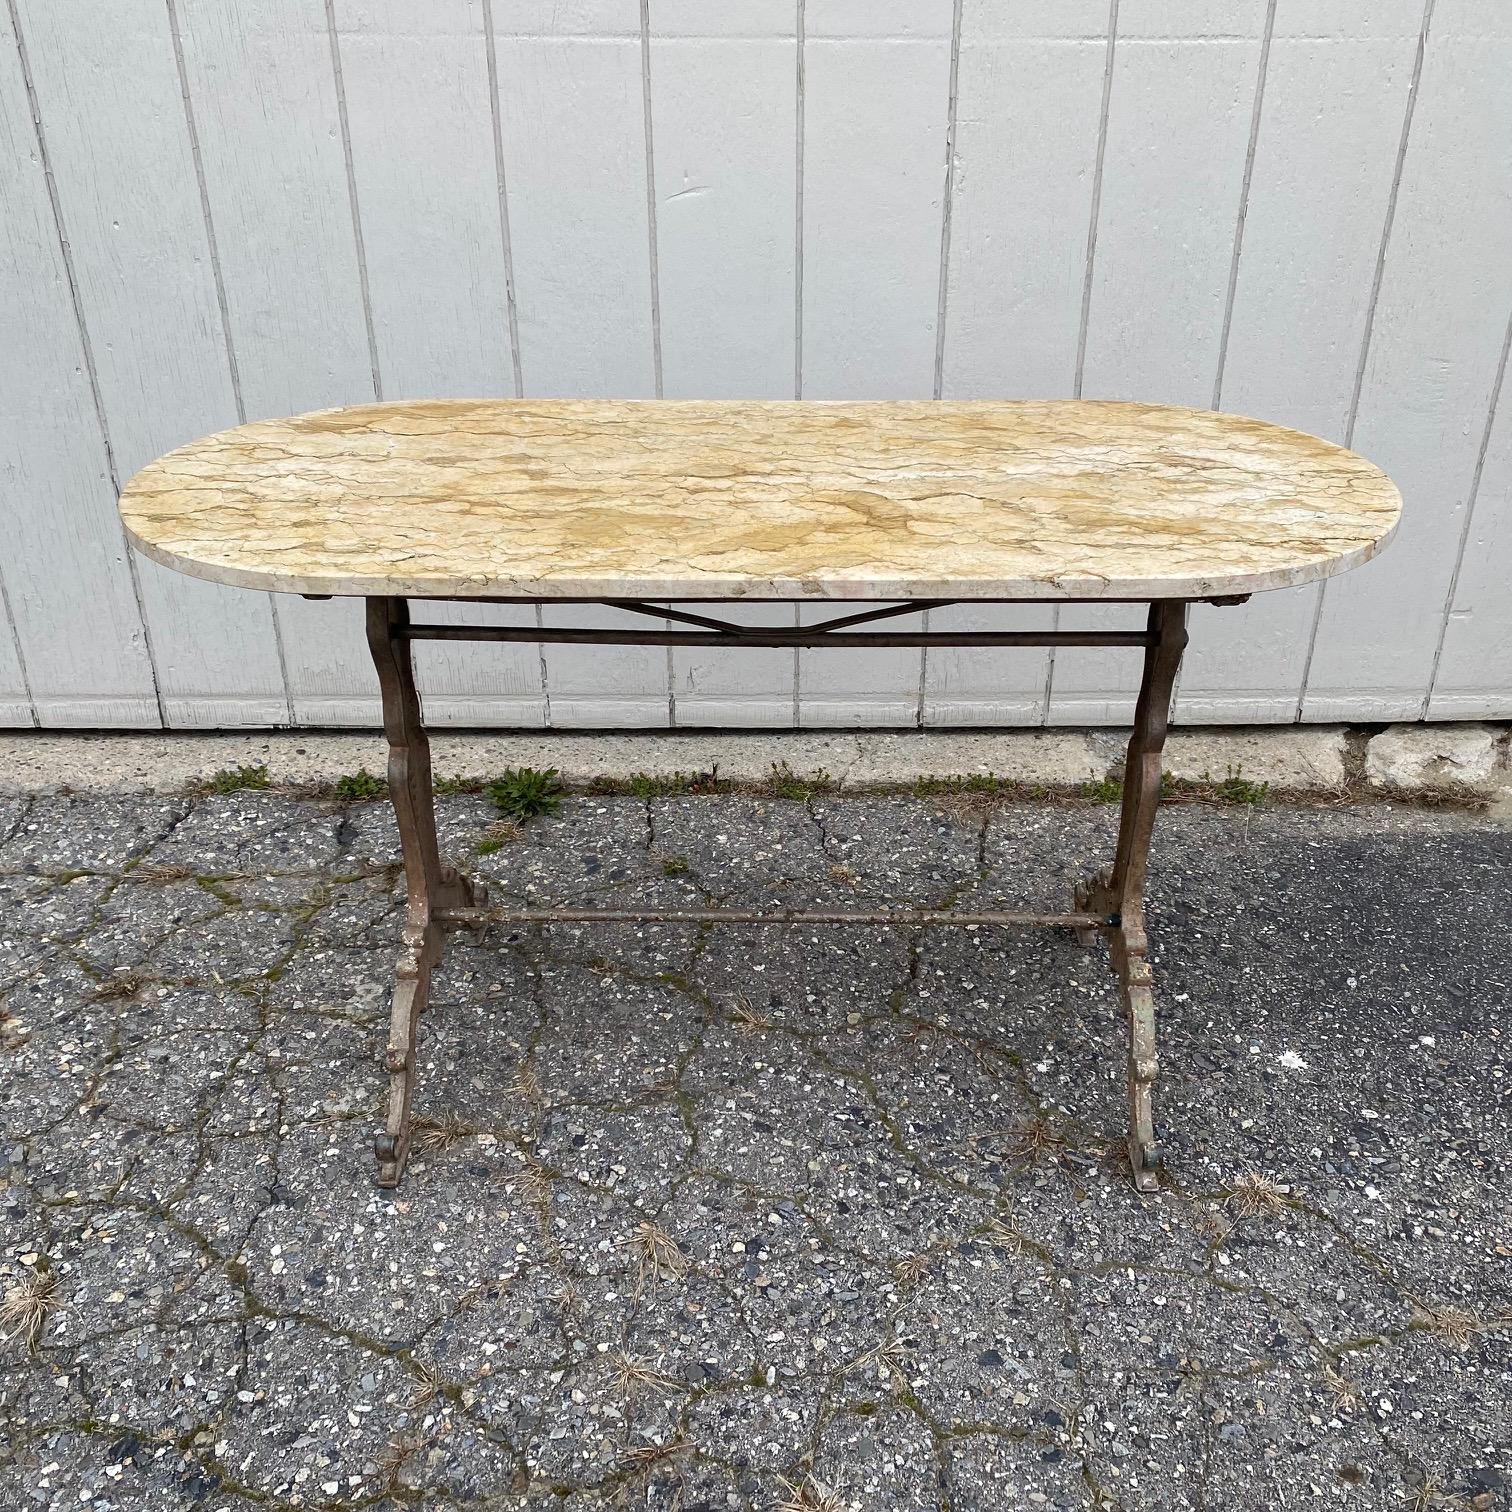 Versatile French marble top oval cafe table or writing desk with a classic Provincial iron base. Marble is a stunning beige marble with veining. Very nice edge on all four sides - and could be in the center of a room, and could also serve as a